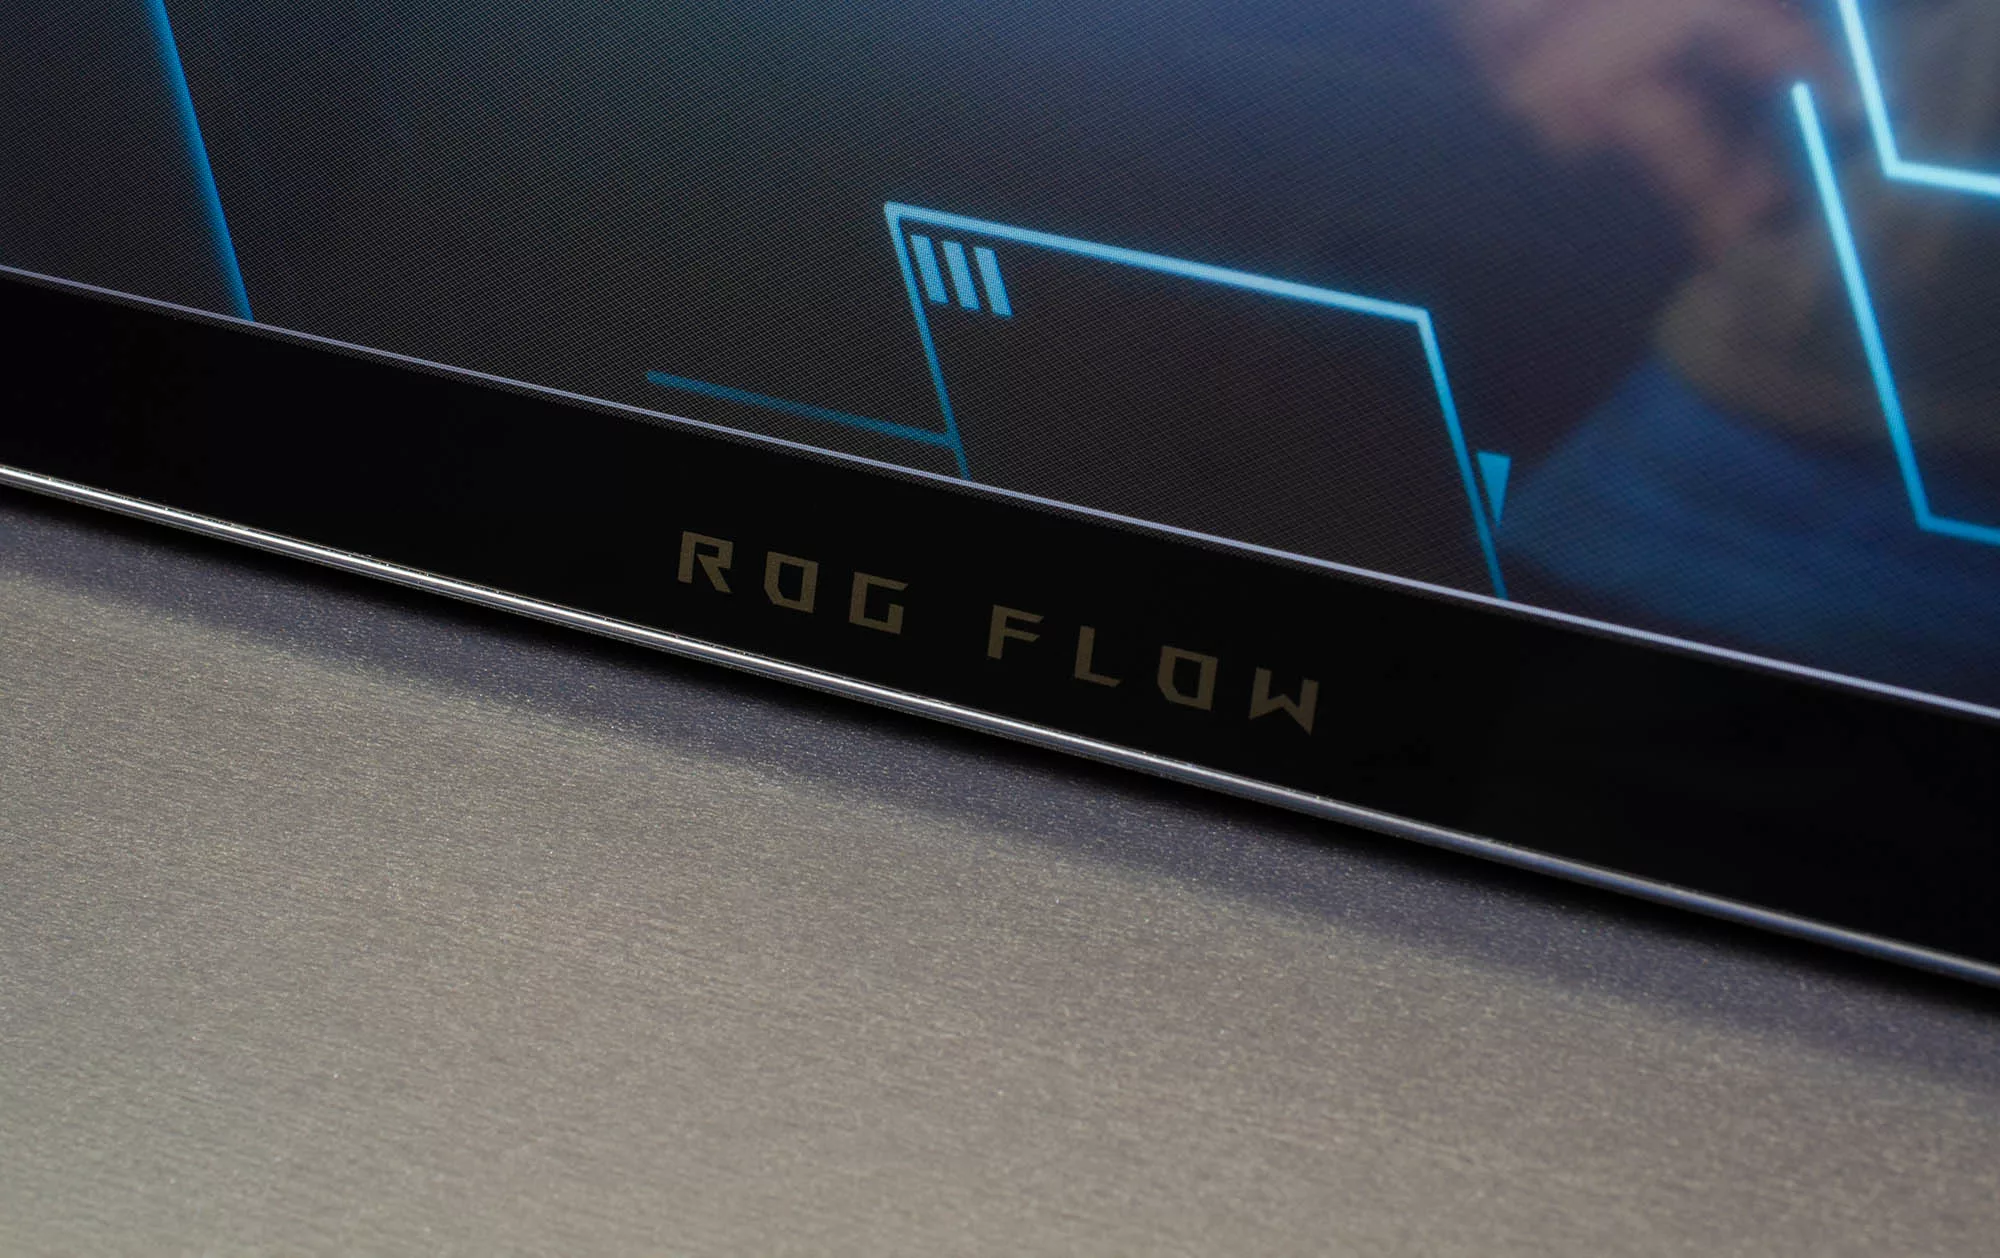 ROG Flow logo on the front edge of the ROG Flow Z13